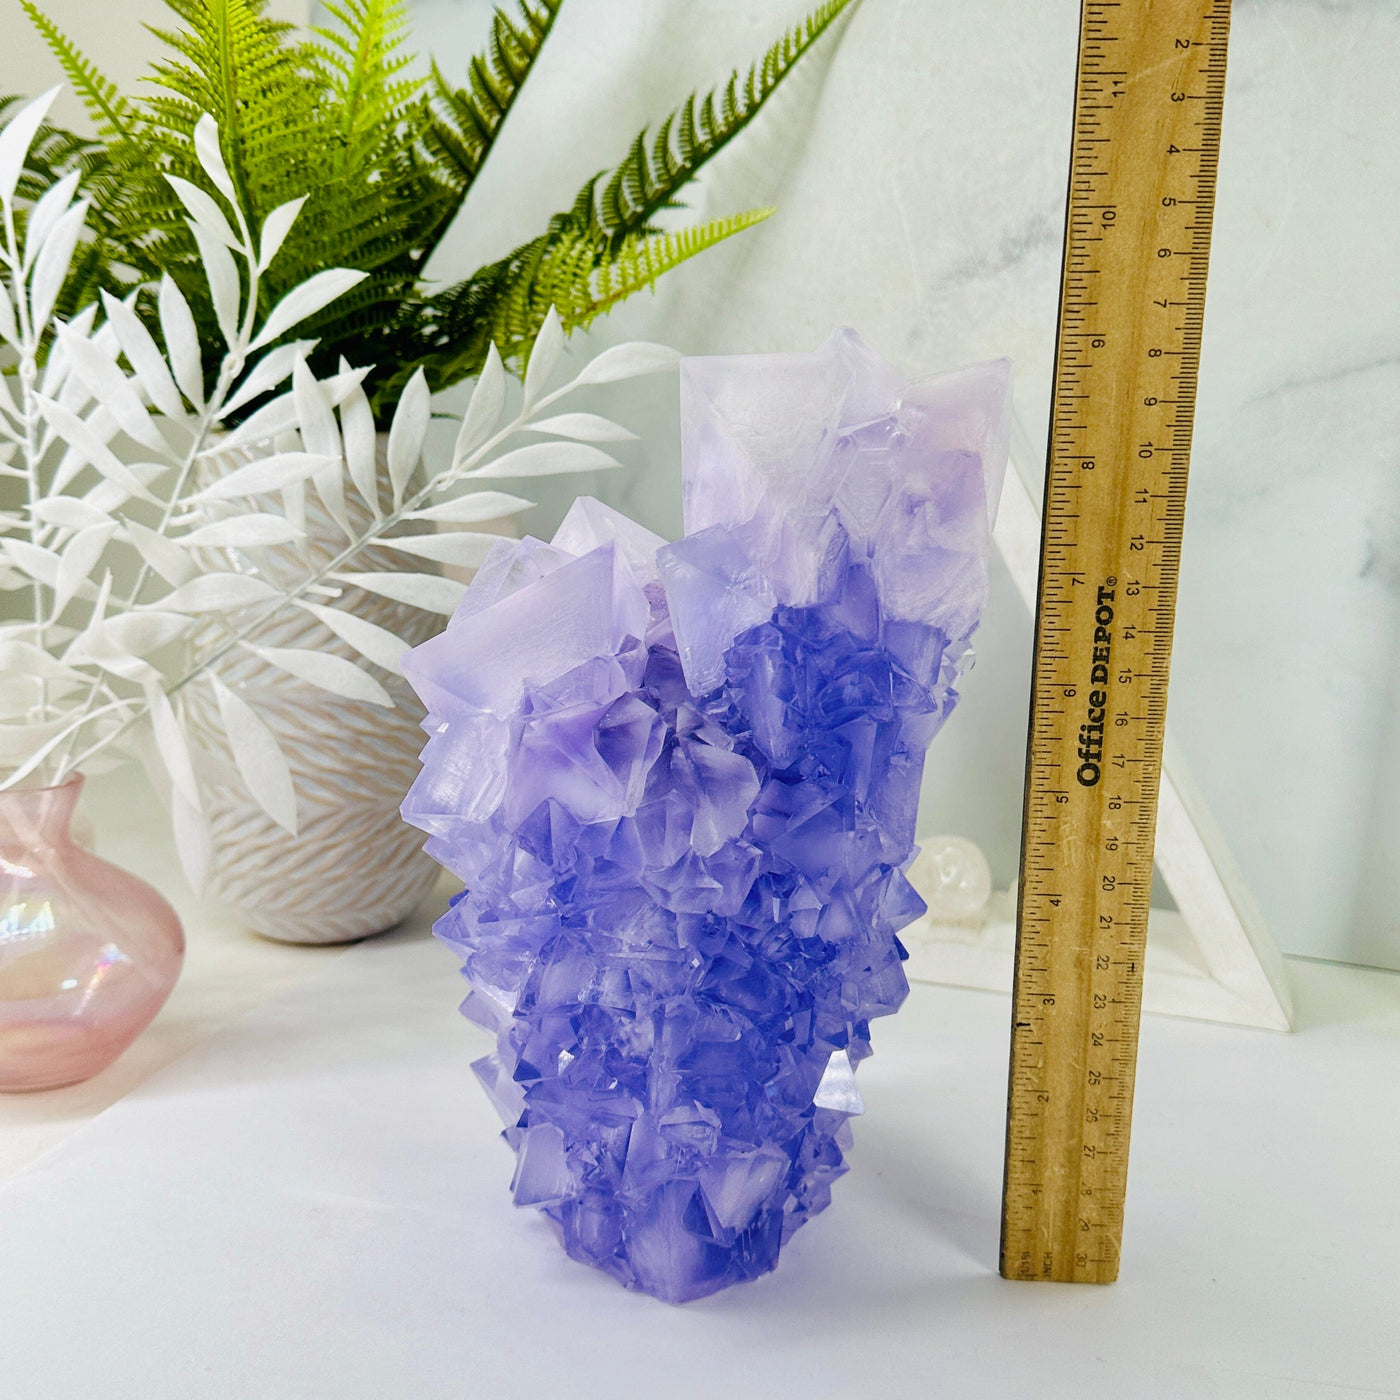 Salt Crystals - Salt formation - Dyed Light Purple - AS IS with ruler for size reference